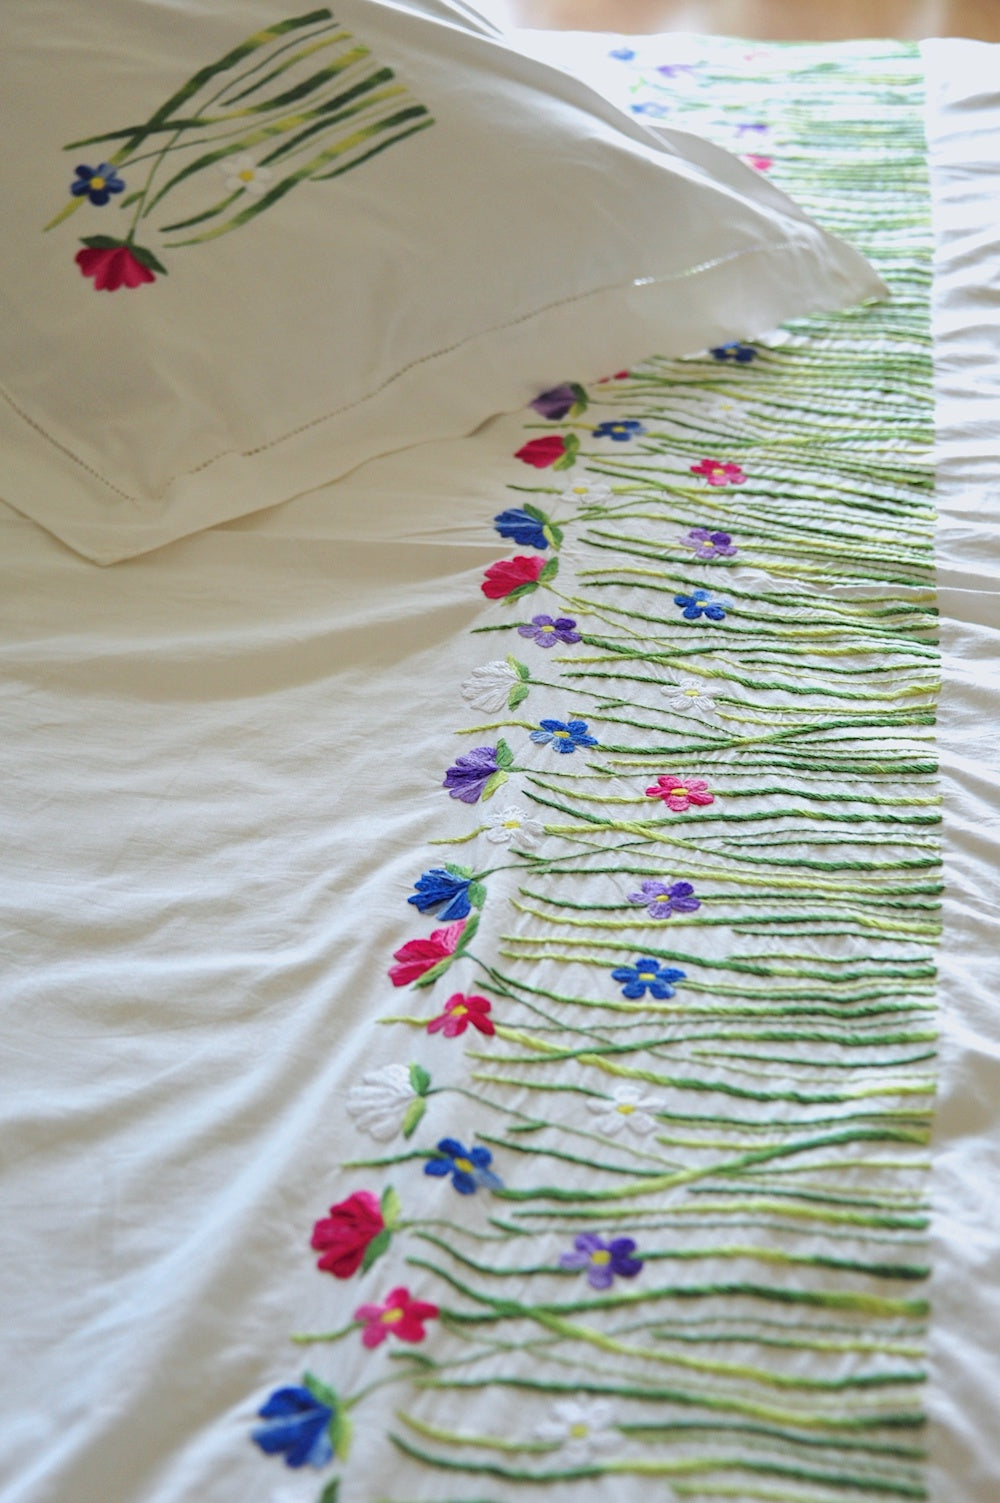 Hand Embroidered Floral Duvet Cover, at hem, Multicolor Tulip Flowers - kinchecom